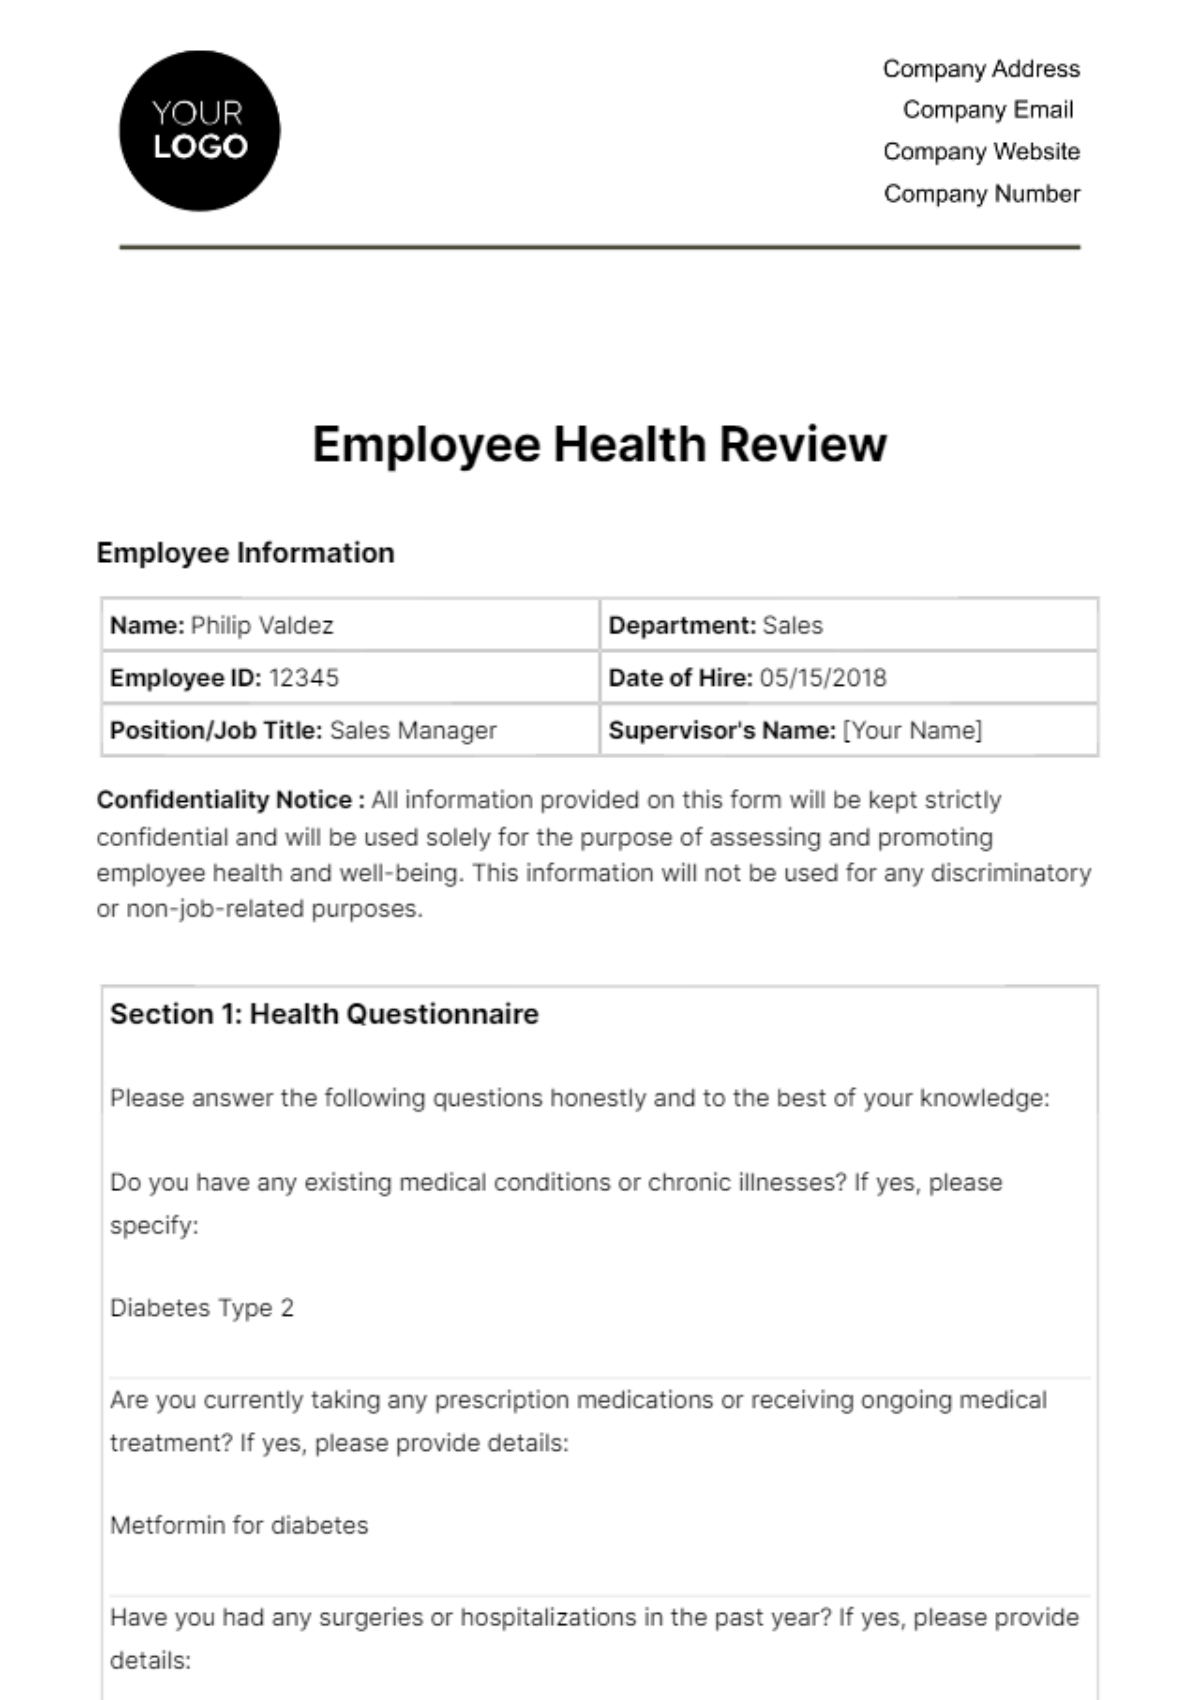 Employee Health Review HR Template